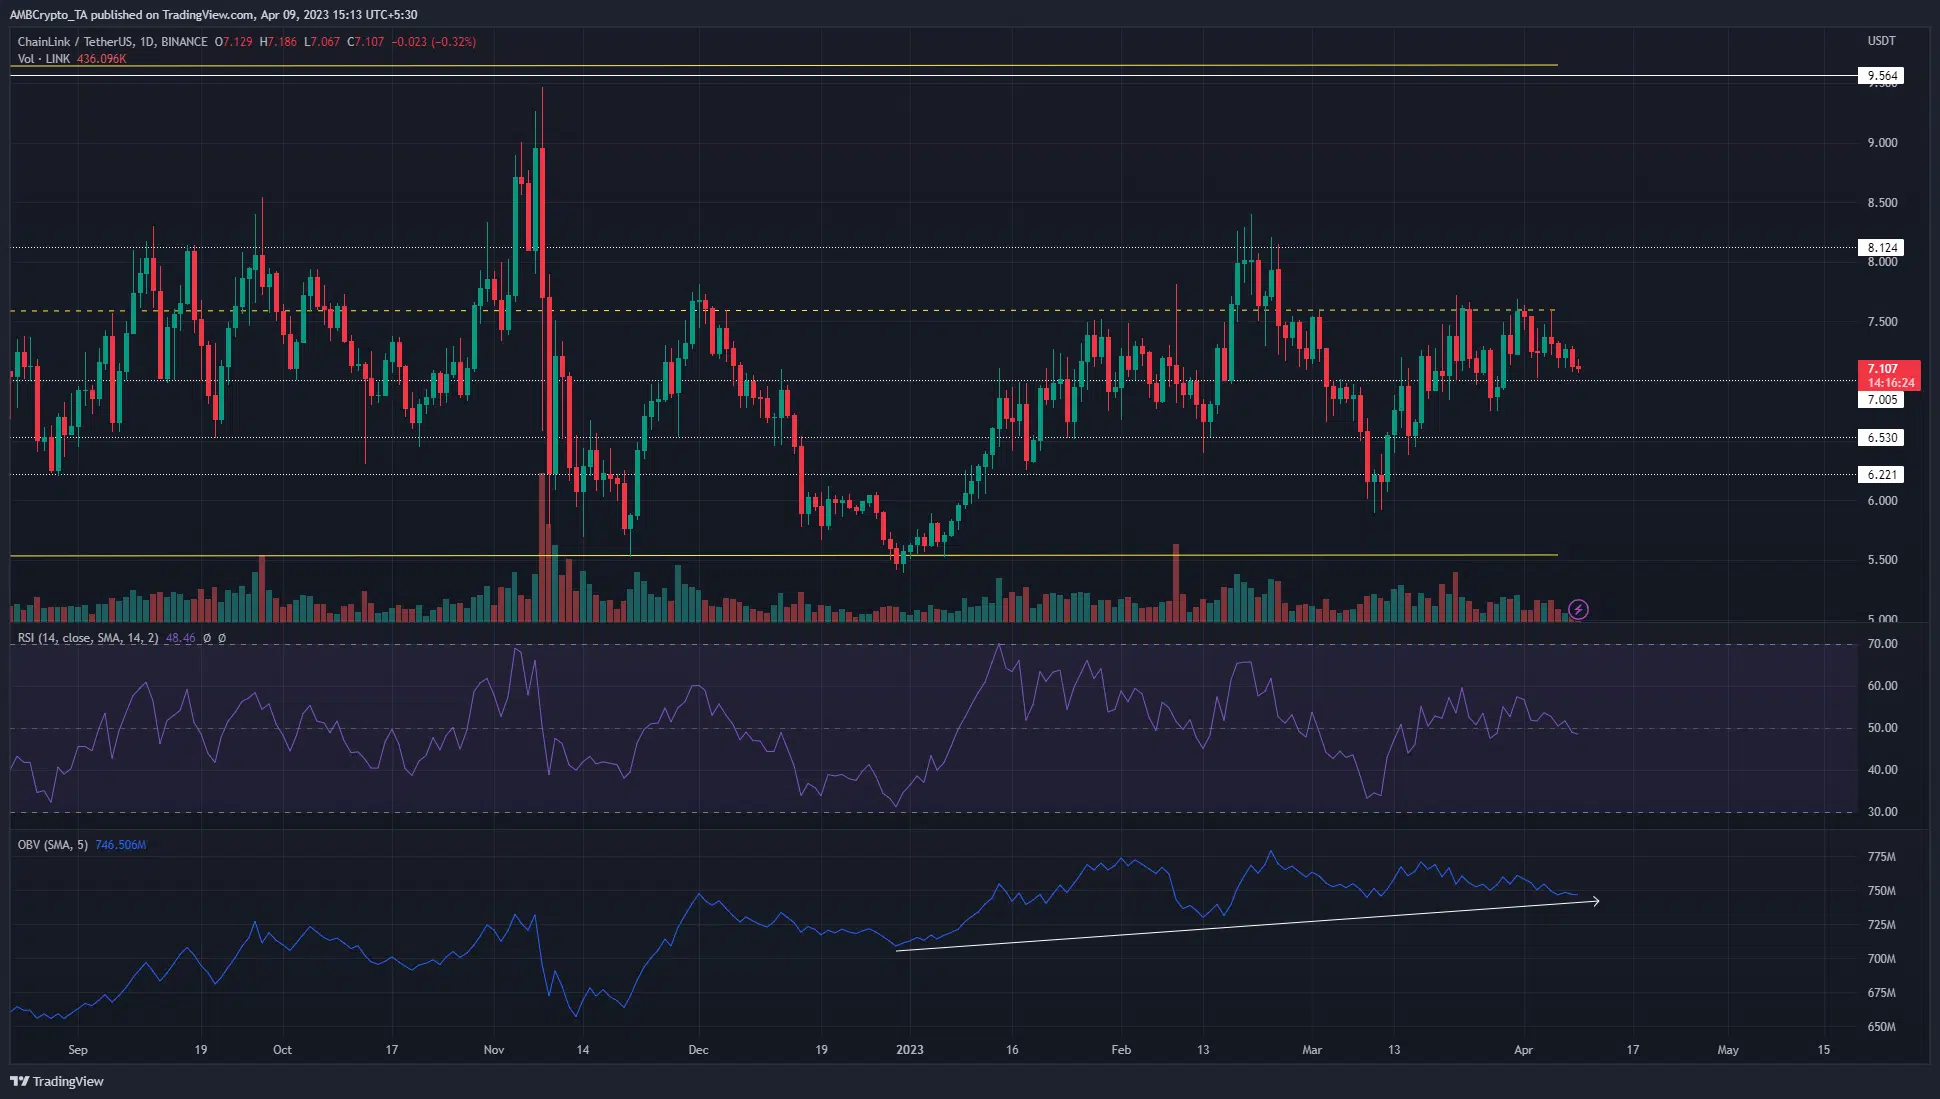 Chainlink shows accumulation from buyers but has stalled at resistance